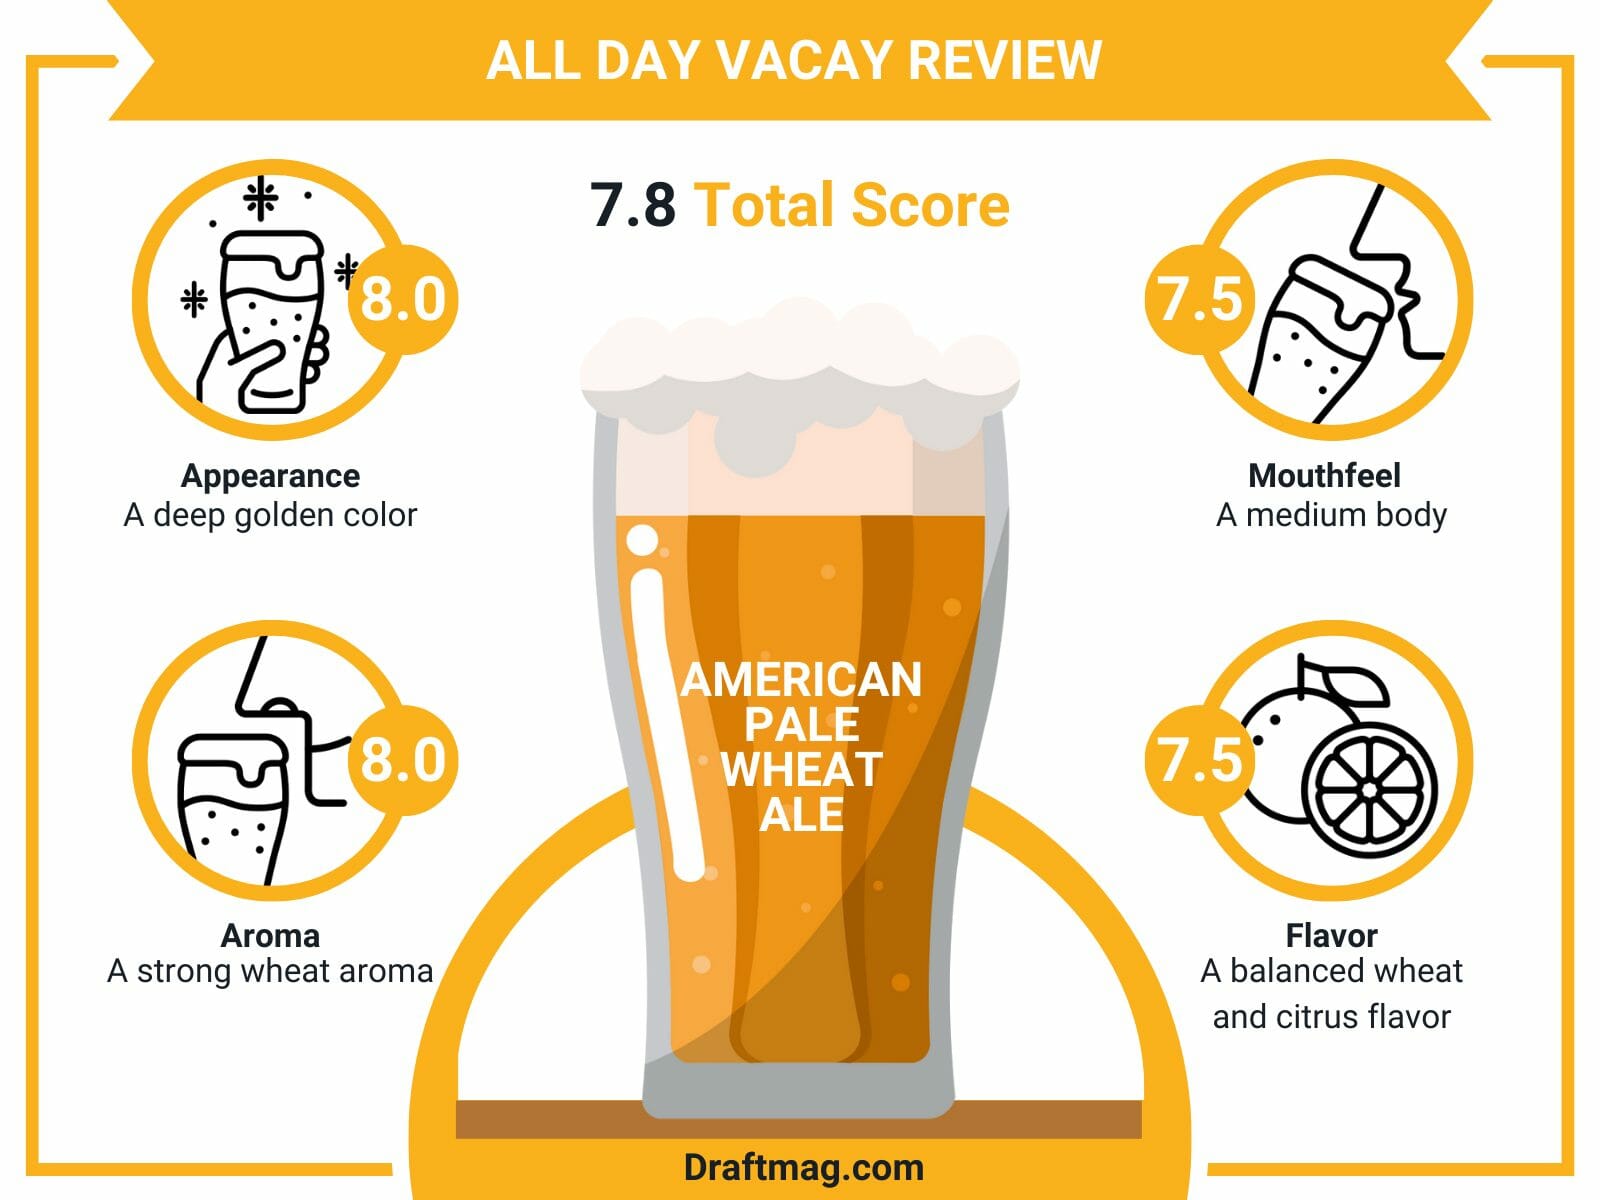 All day vacay review infographic